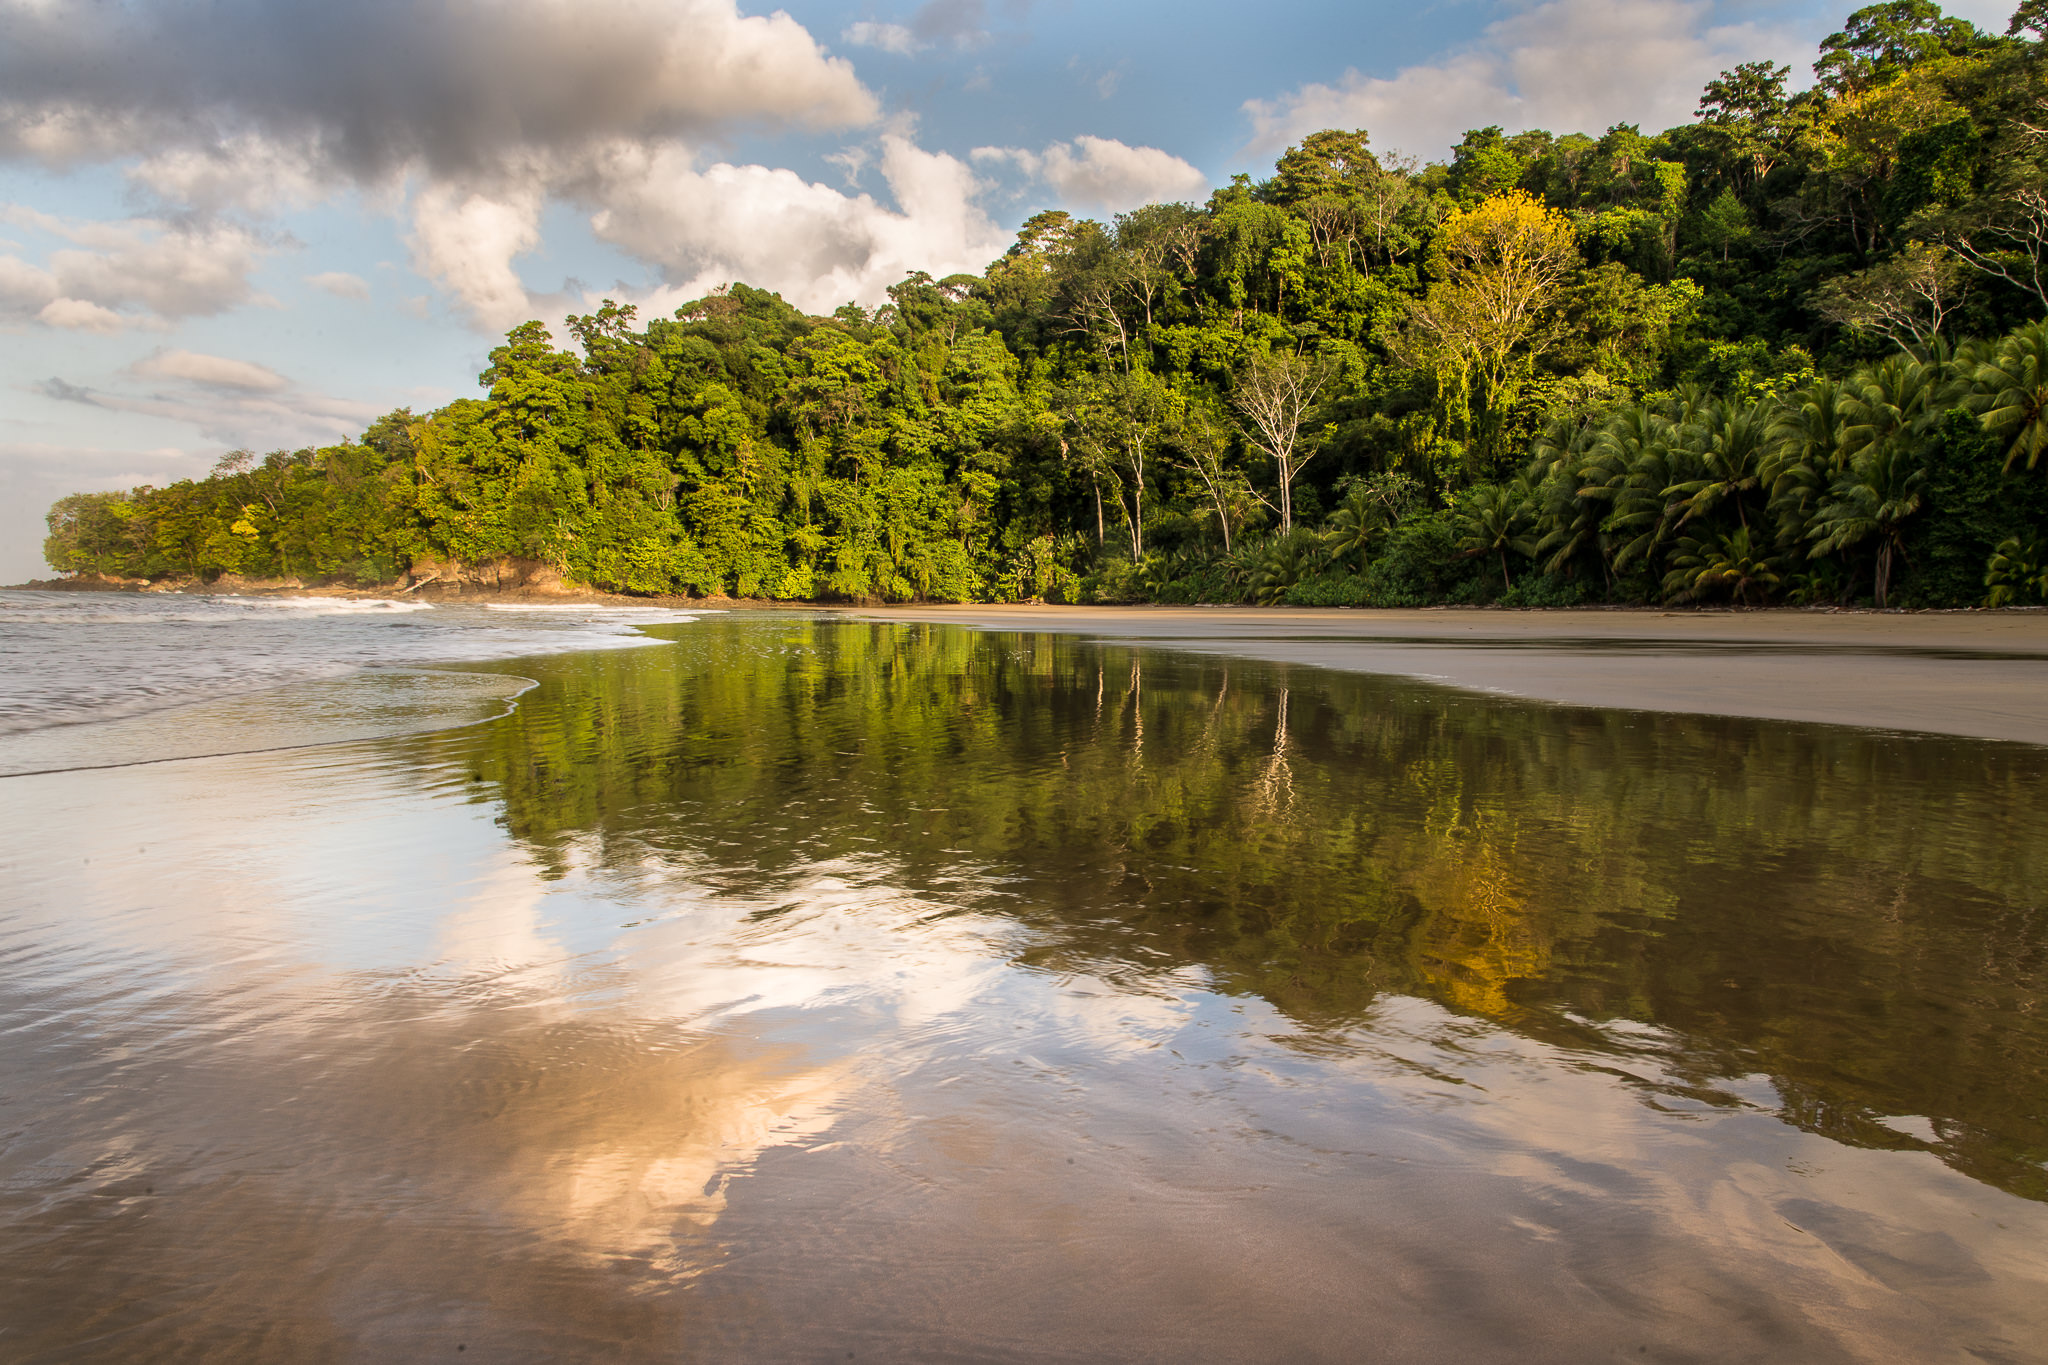 Costa Rica: A Premium Location For Foreign Direct Investment